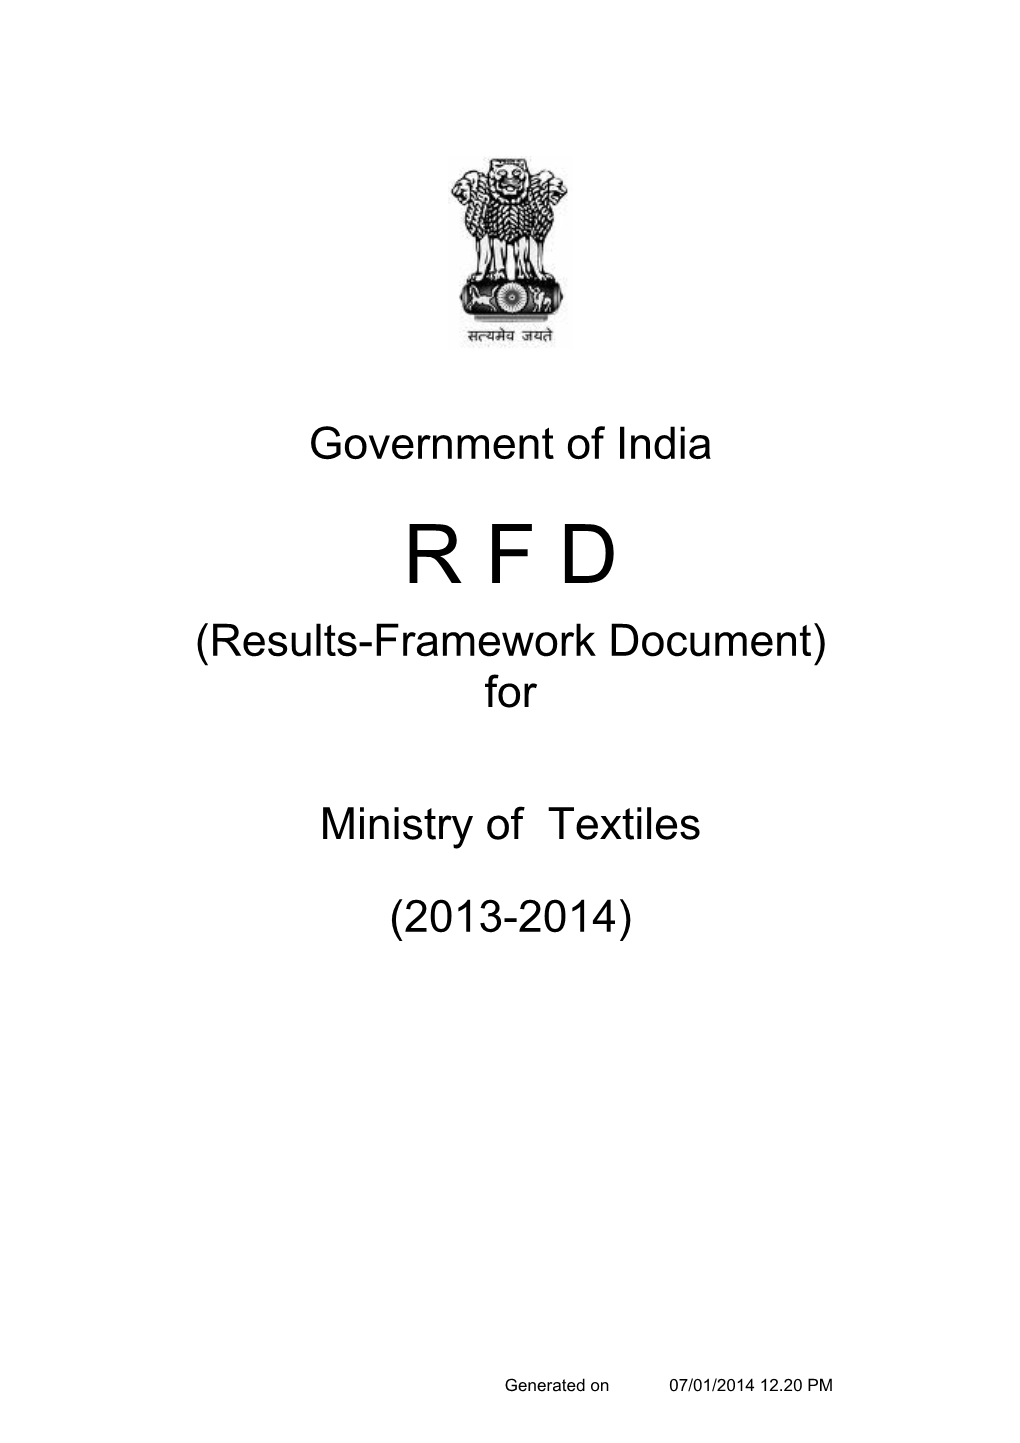 (Results-Framework Document) for Ministry of Textiles